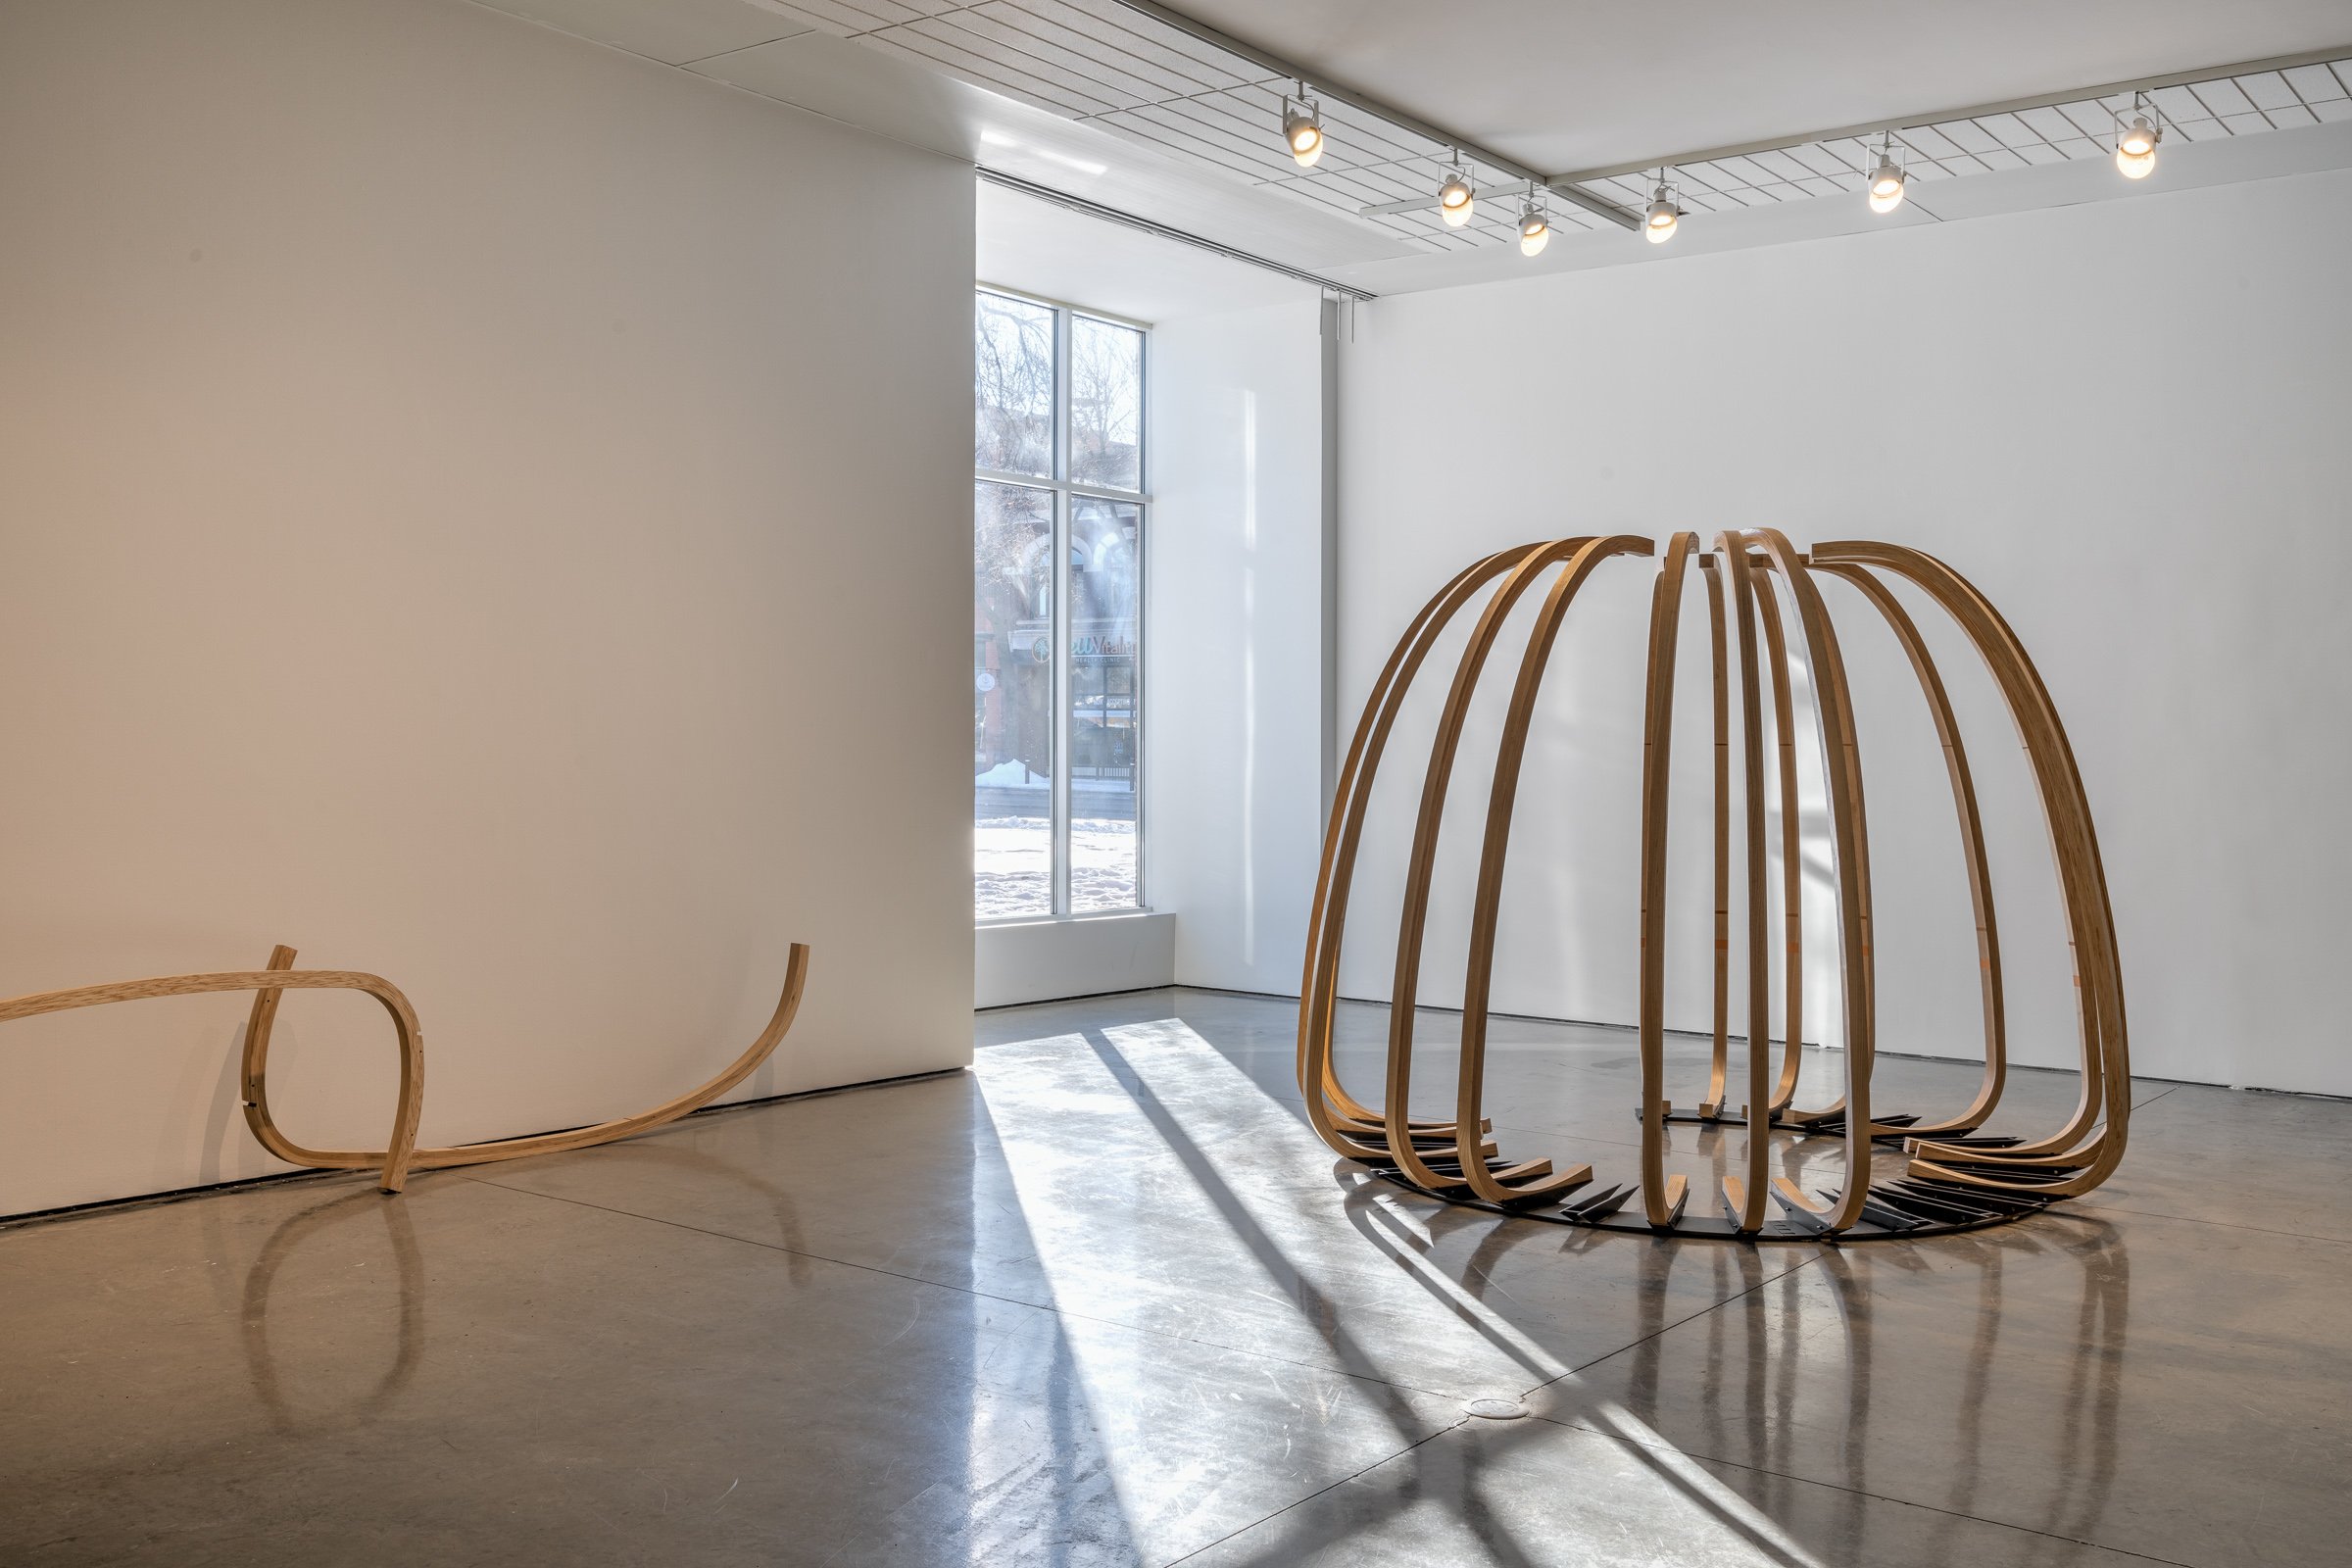  Tanya Lukin Linklater with Tiffany Shaw,  Indigenous geometries  (installation view), 2019, cold rolled steel, laminated ash, paint, matt polyurethane, hardware. Courtesy of the artists. Photo by Blaine Campbell. 